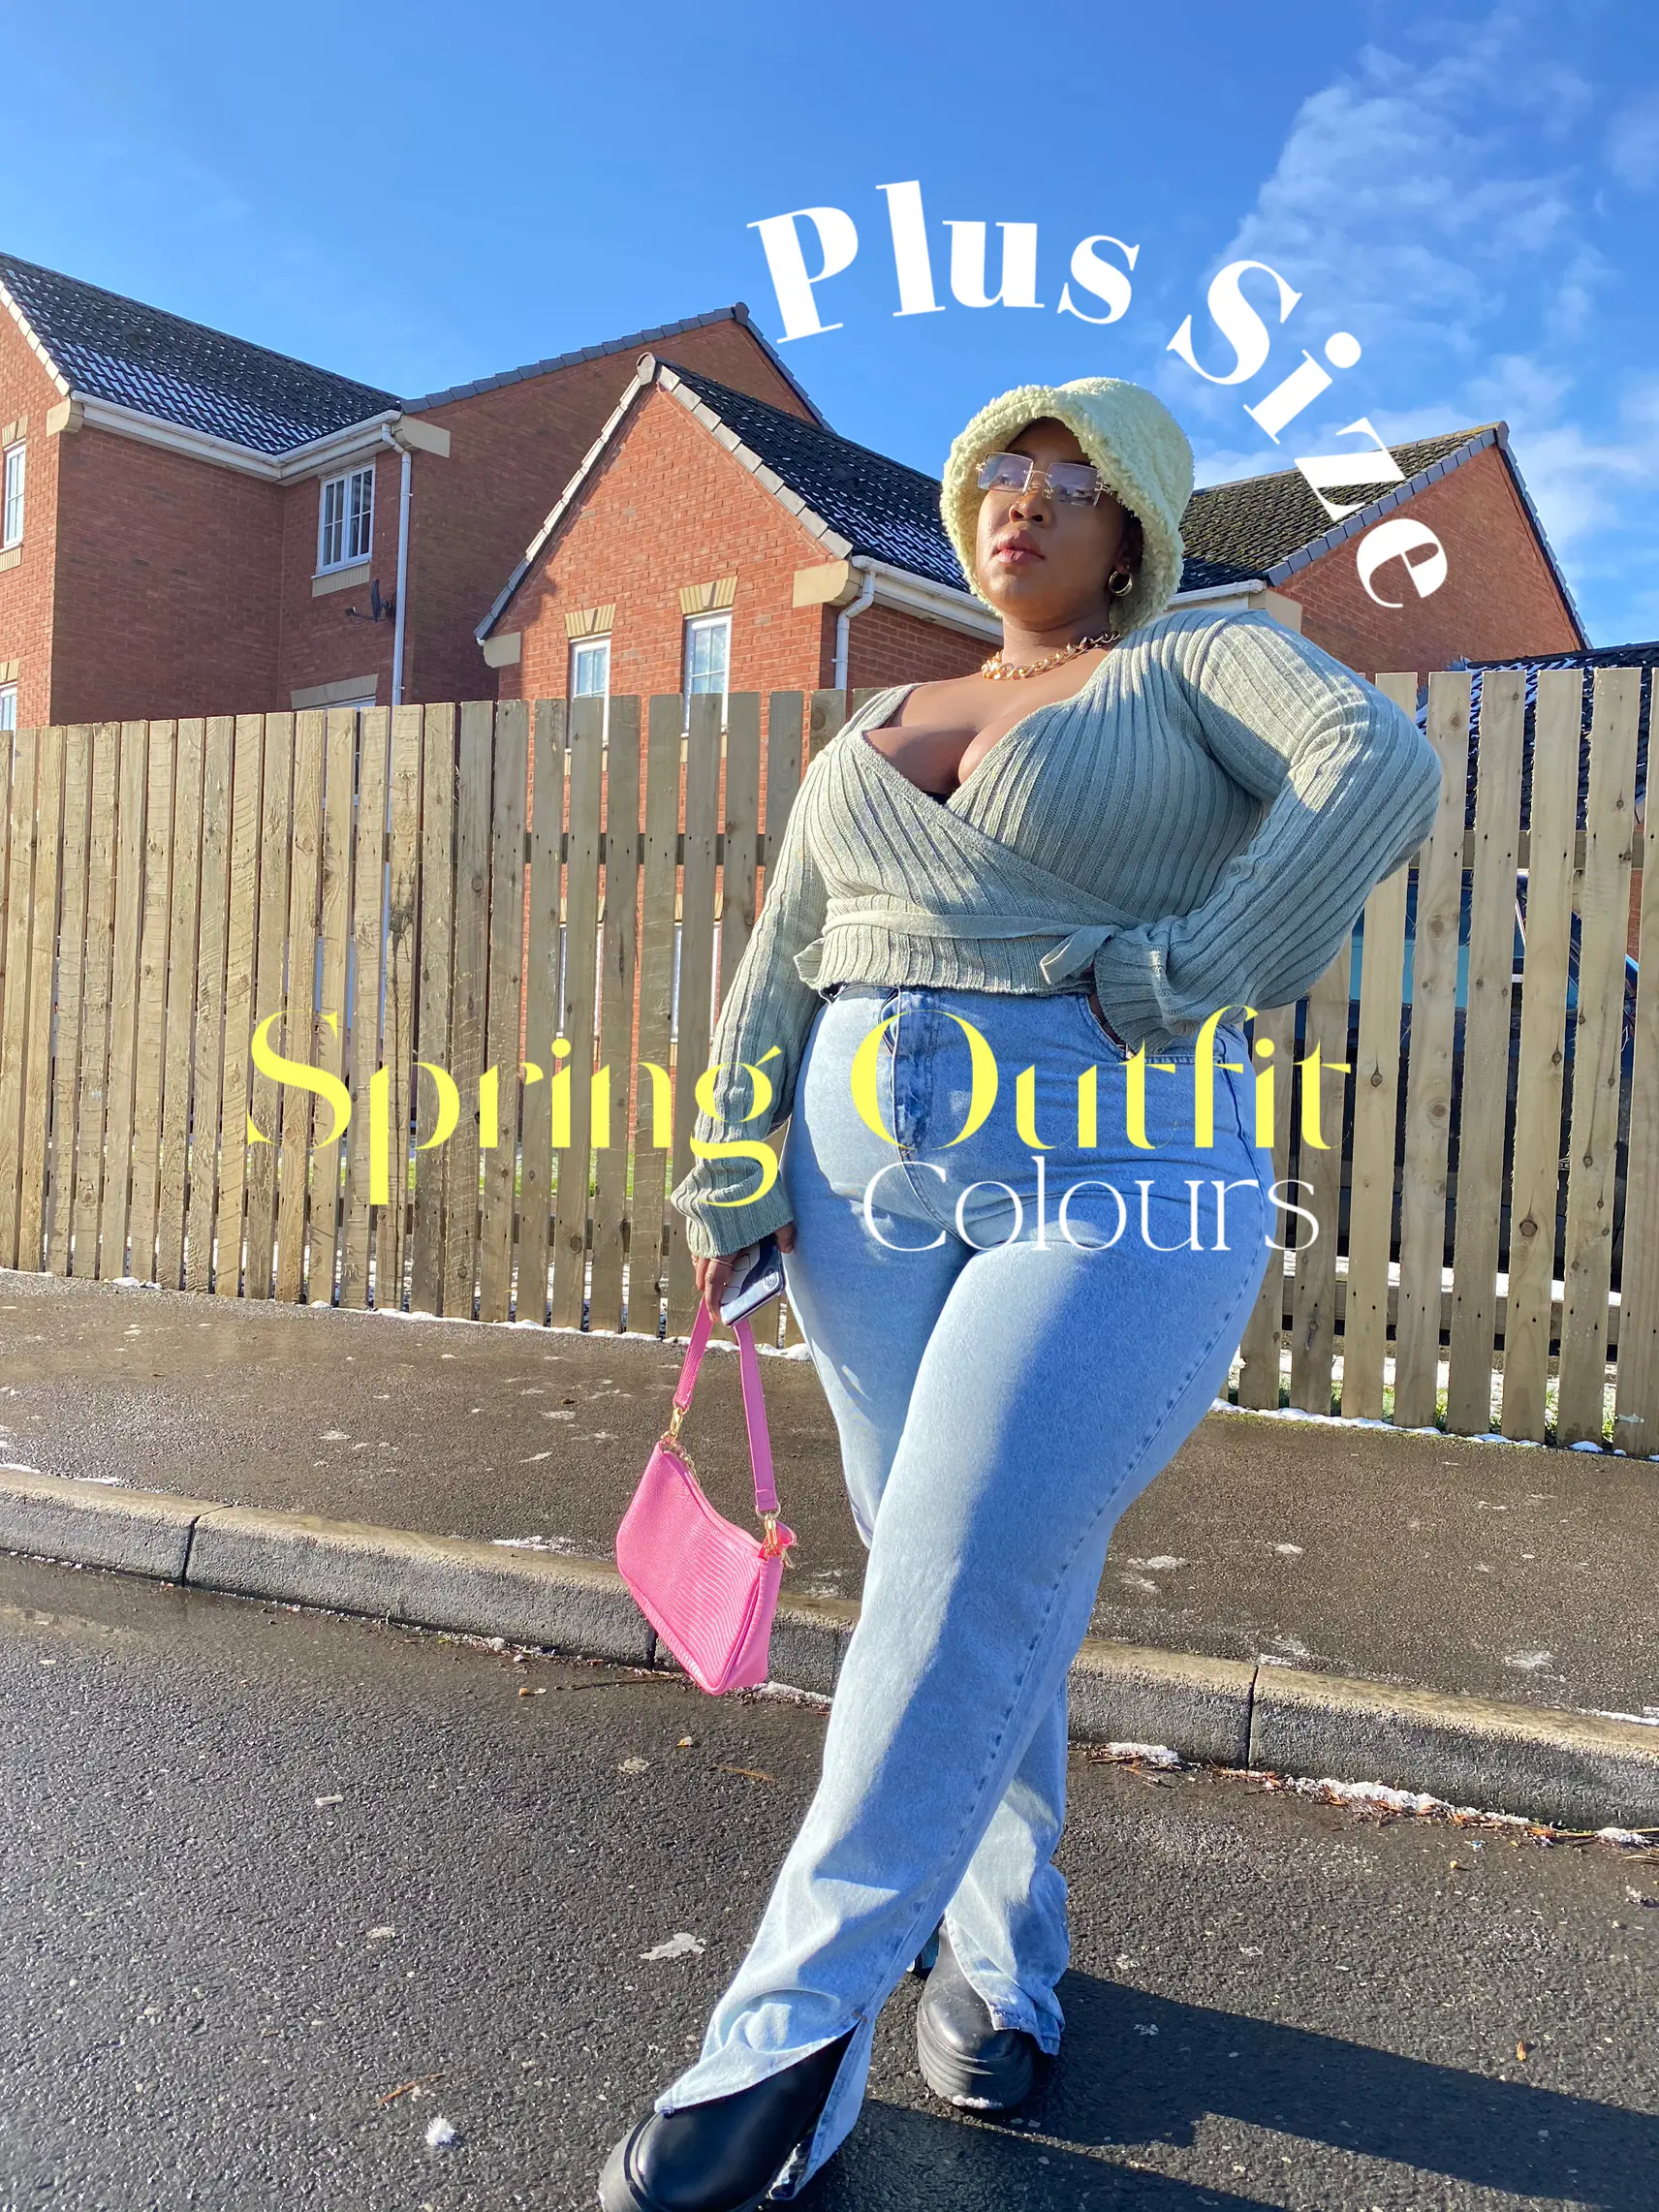 SPRING OUTFITS TO WEAR: Plus Size Edition